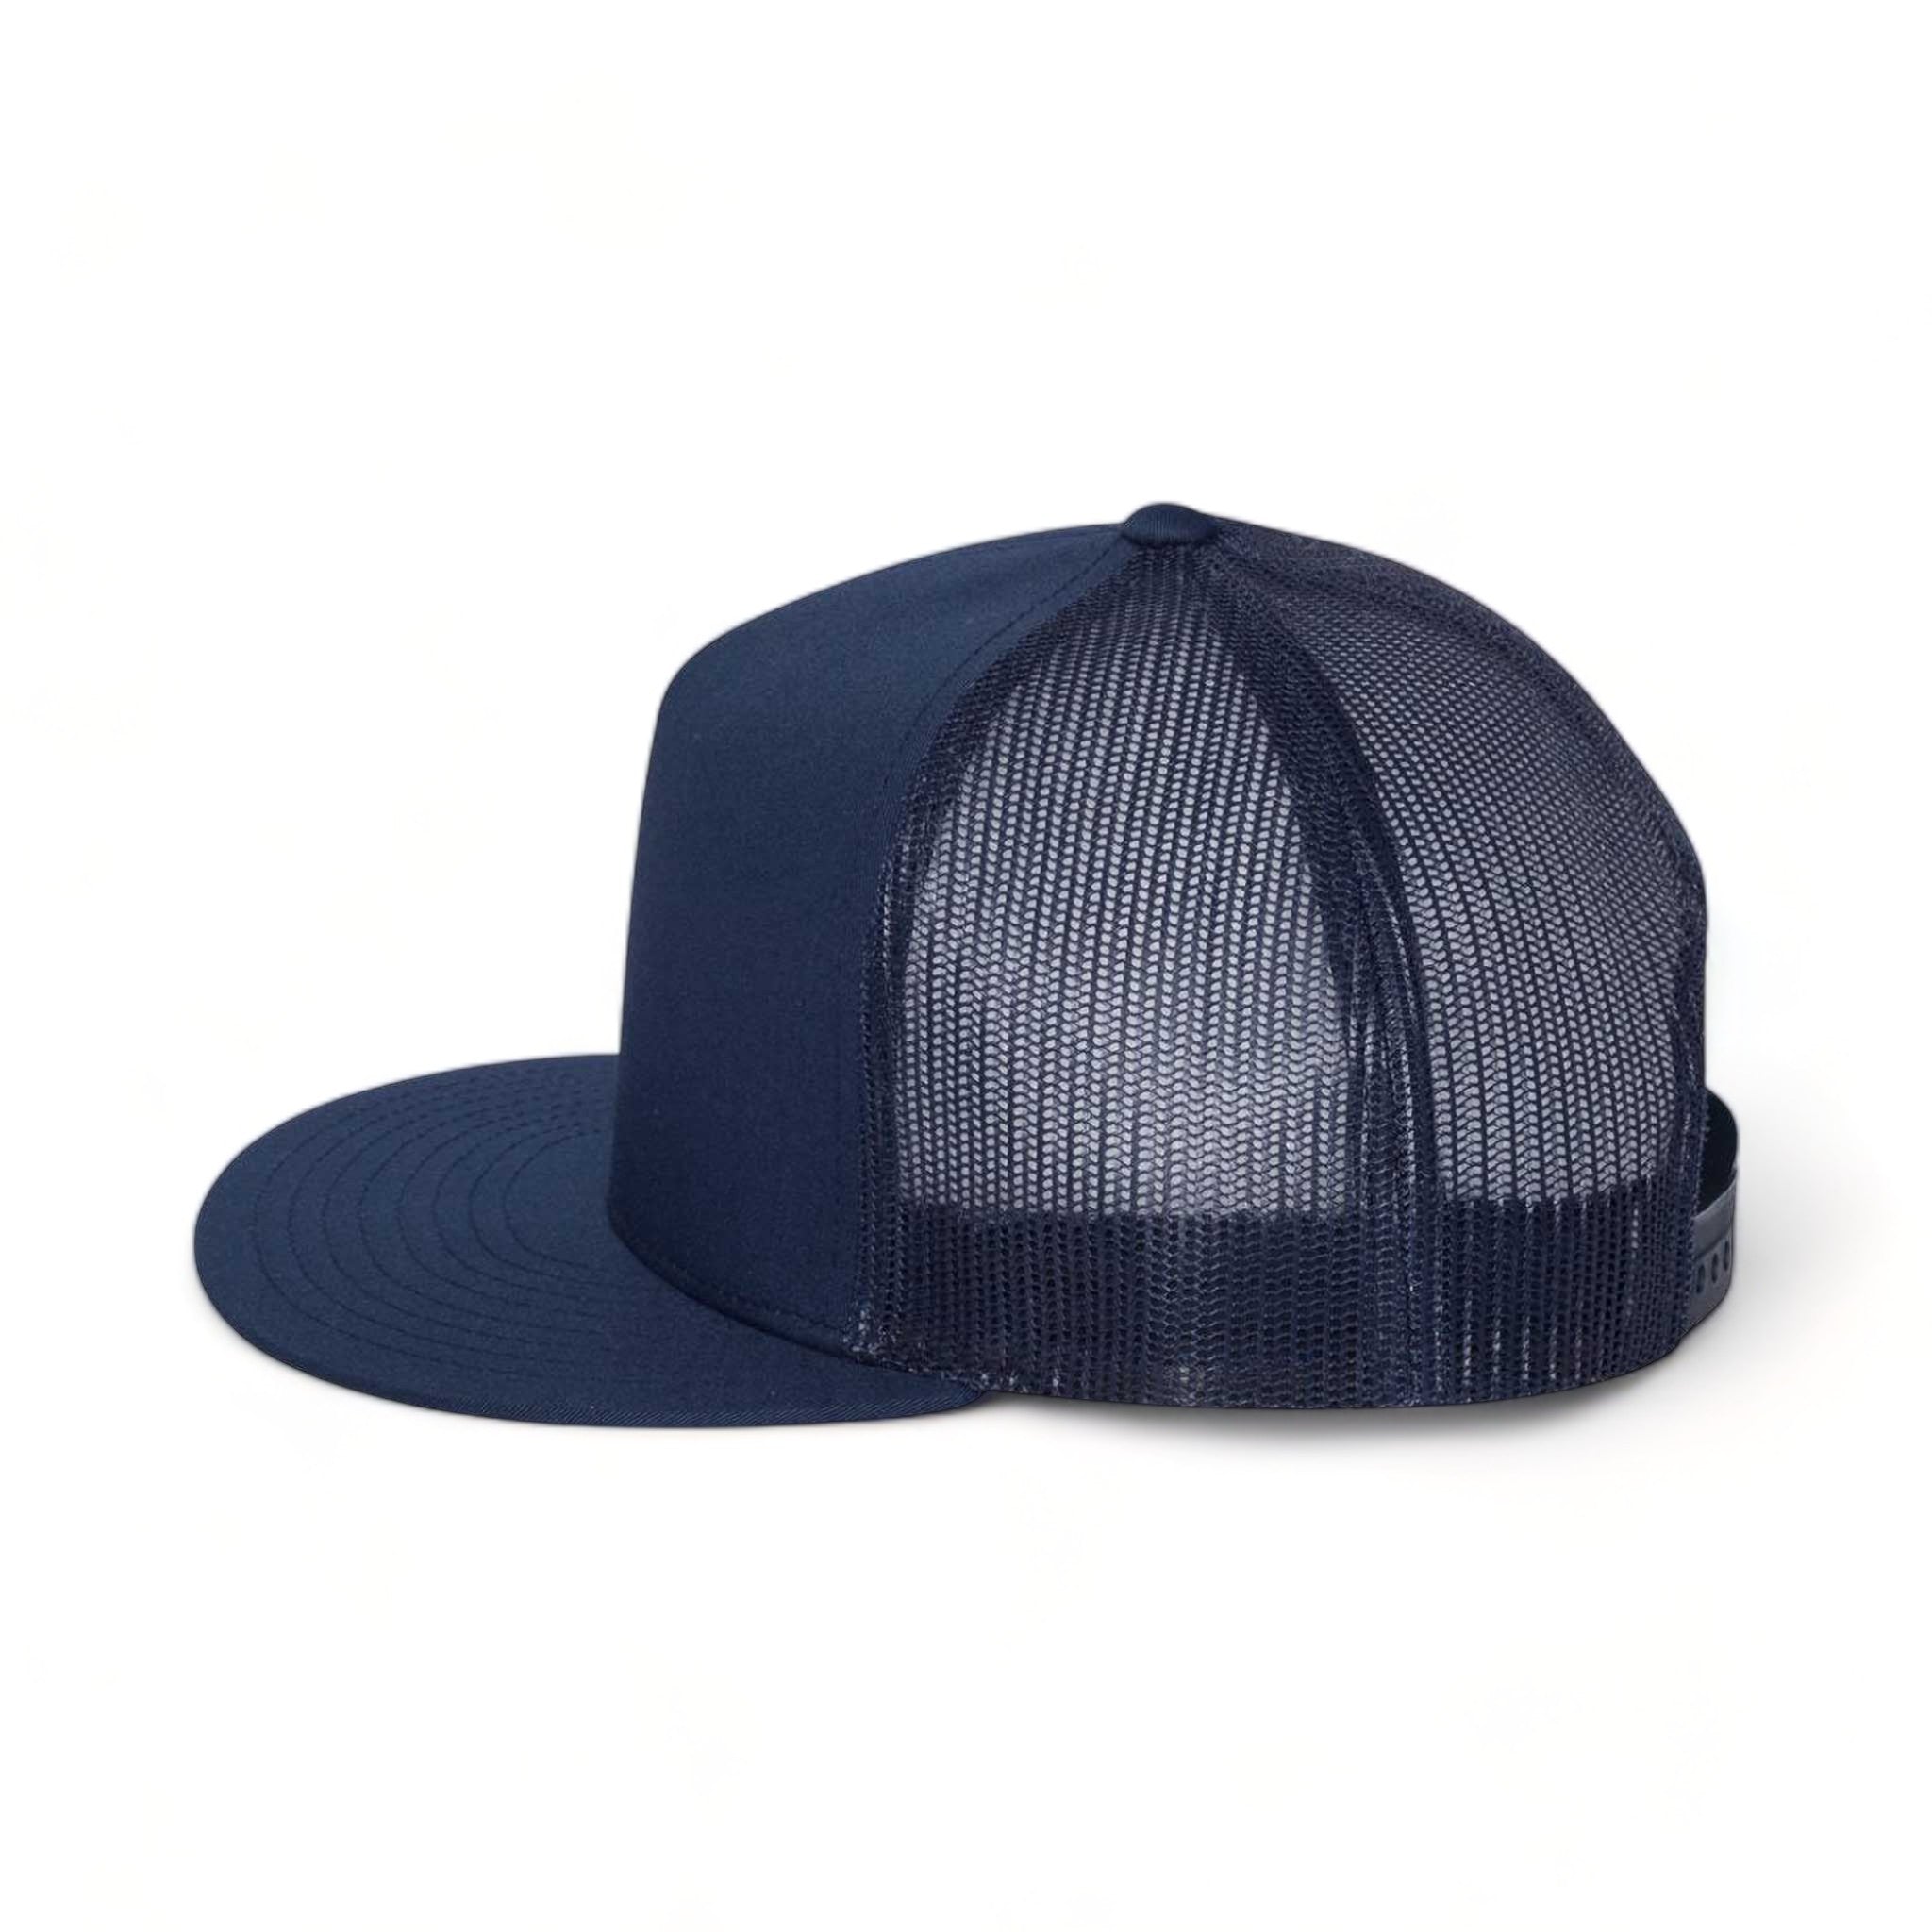 Side view of YP Classics 6006 custom hat in navy